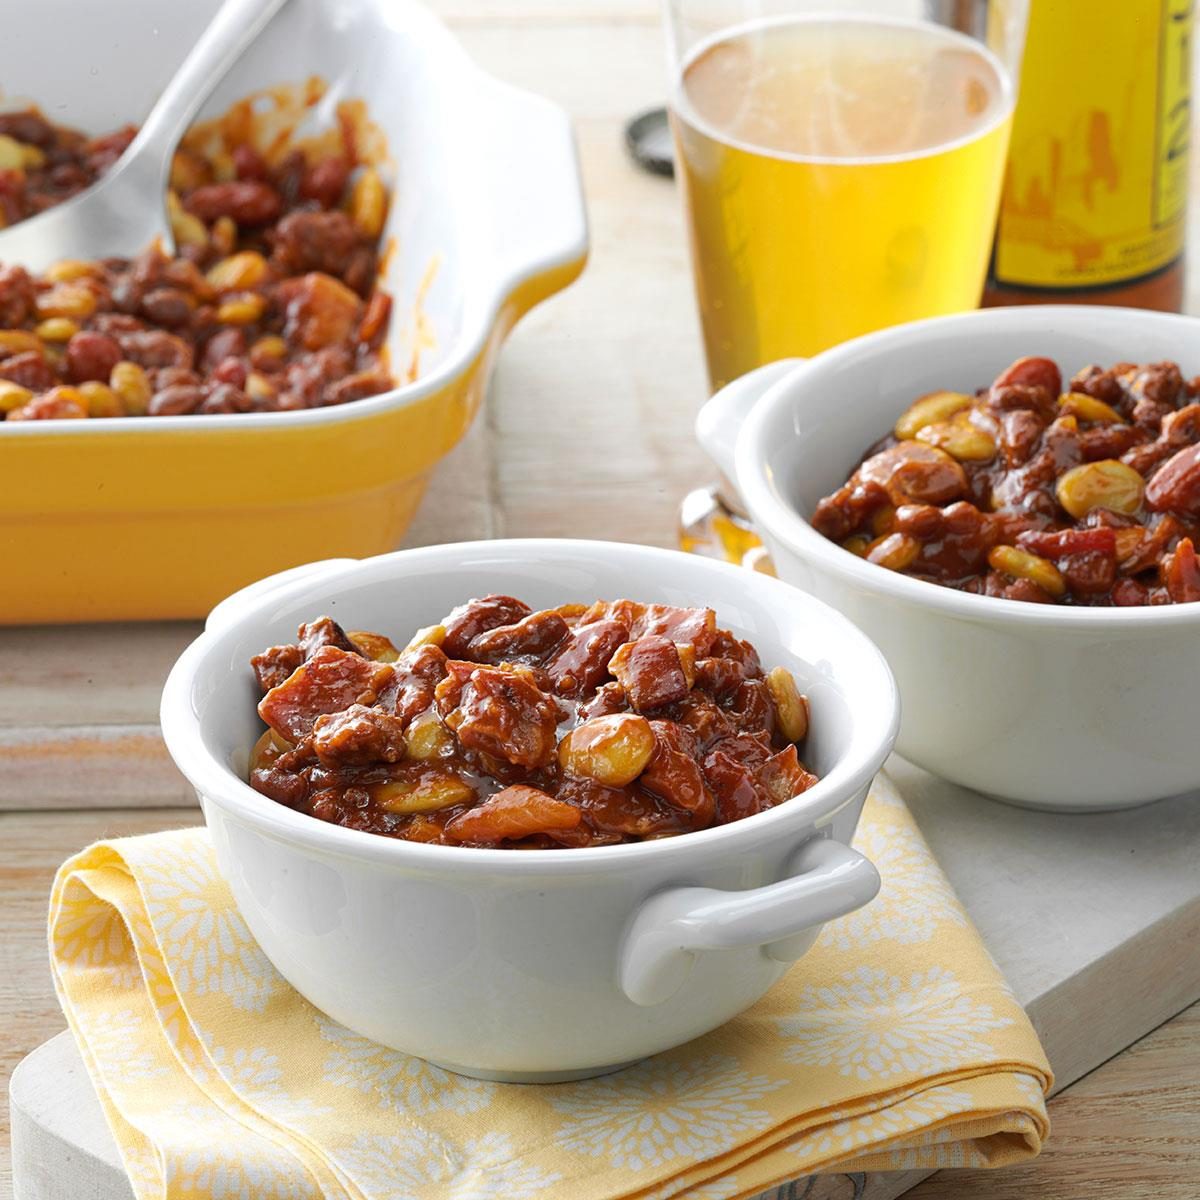 Indiana: Fourth of July Bean Casserole